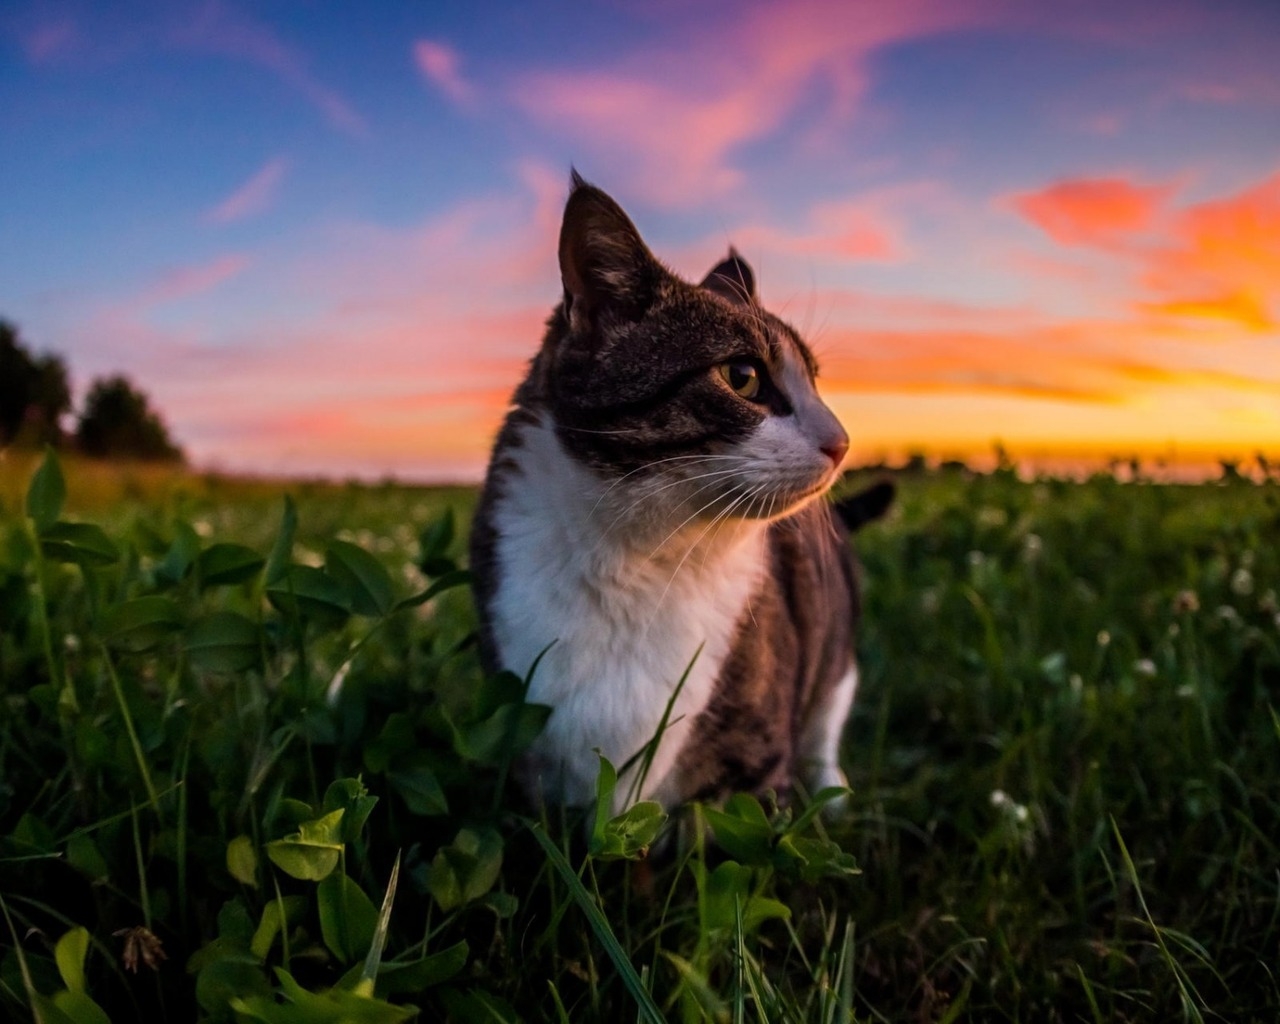 Gorgeous Little Cat and Sunset for 1280 x 1024 resolution